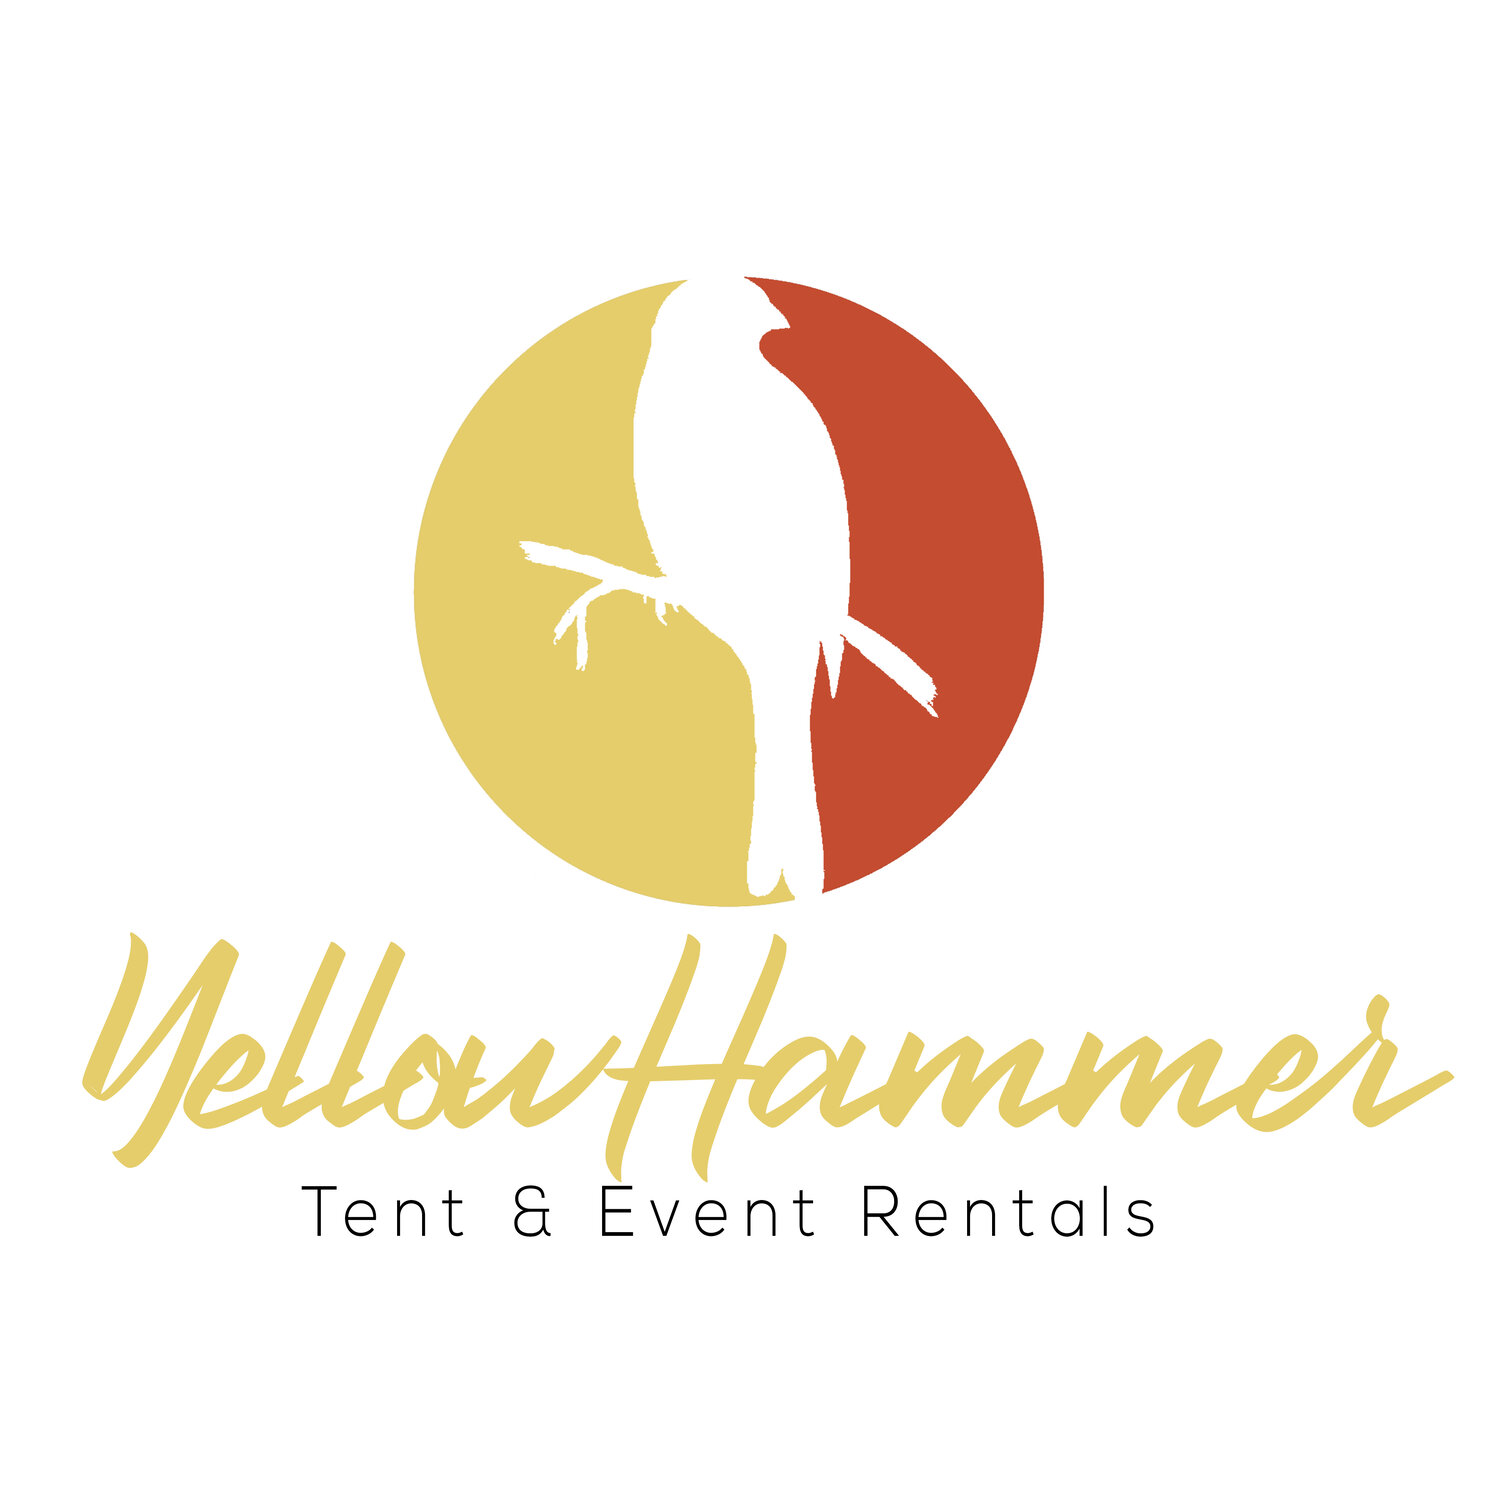 Yellowhammer Tent + Event